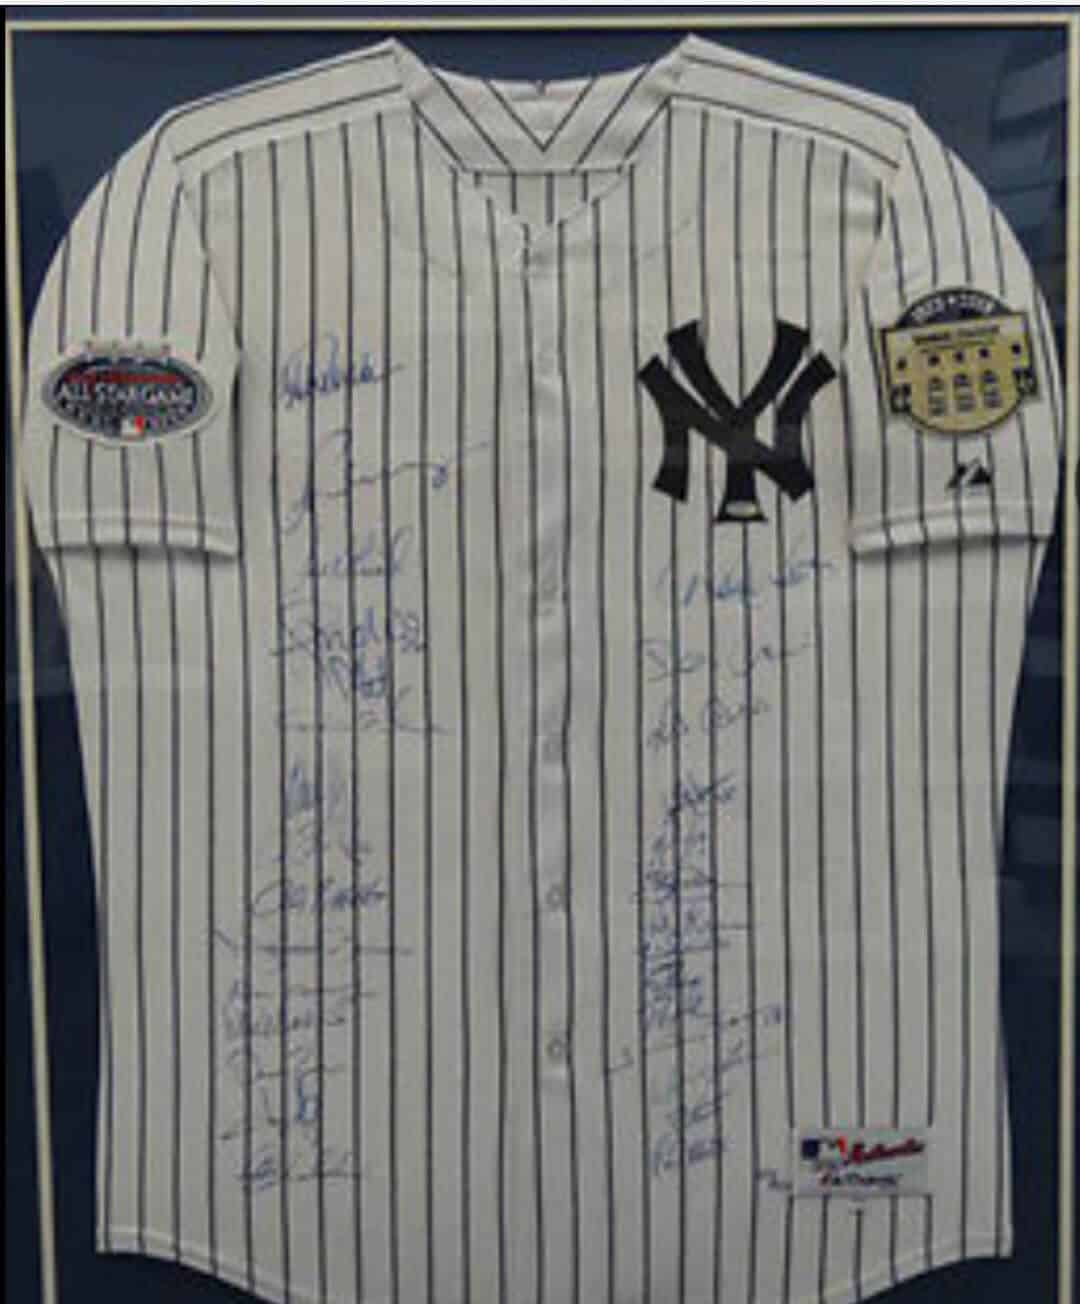 2007 NY Yankees Team signed Autographed Jersey Authenticated - Ace